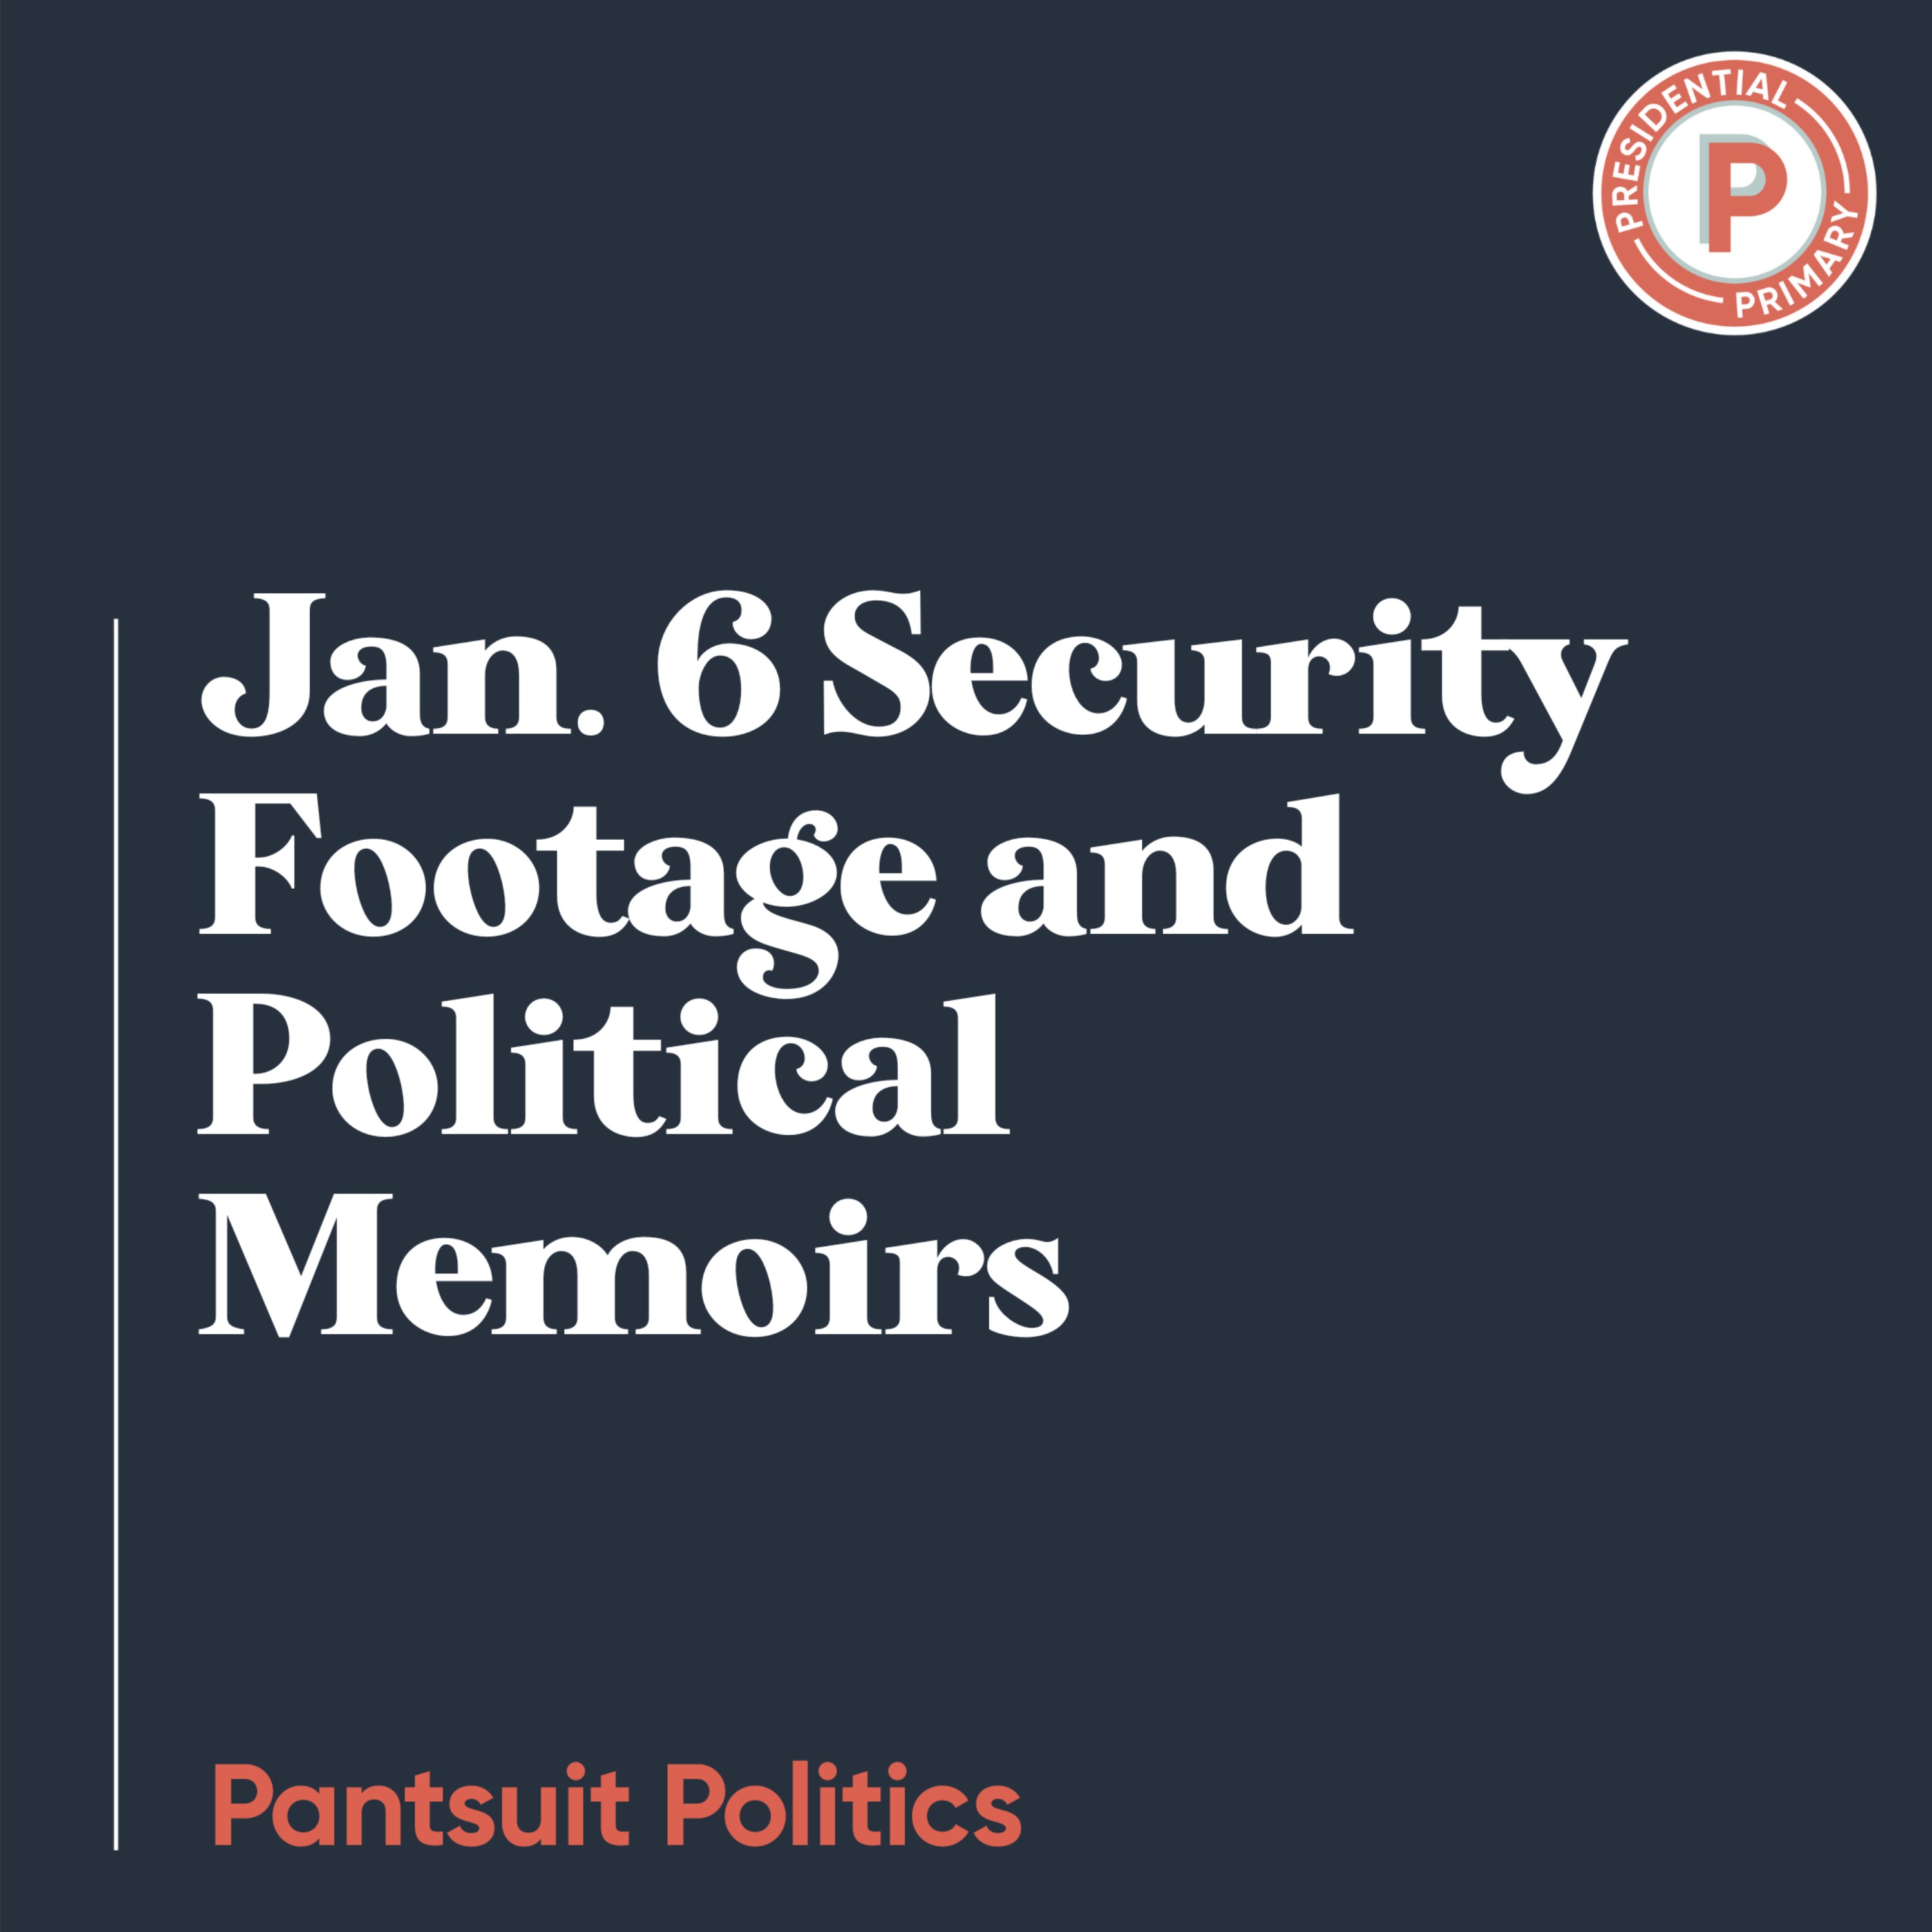 Jan. 6 Security Footage and Political Memoirs